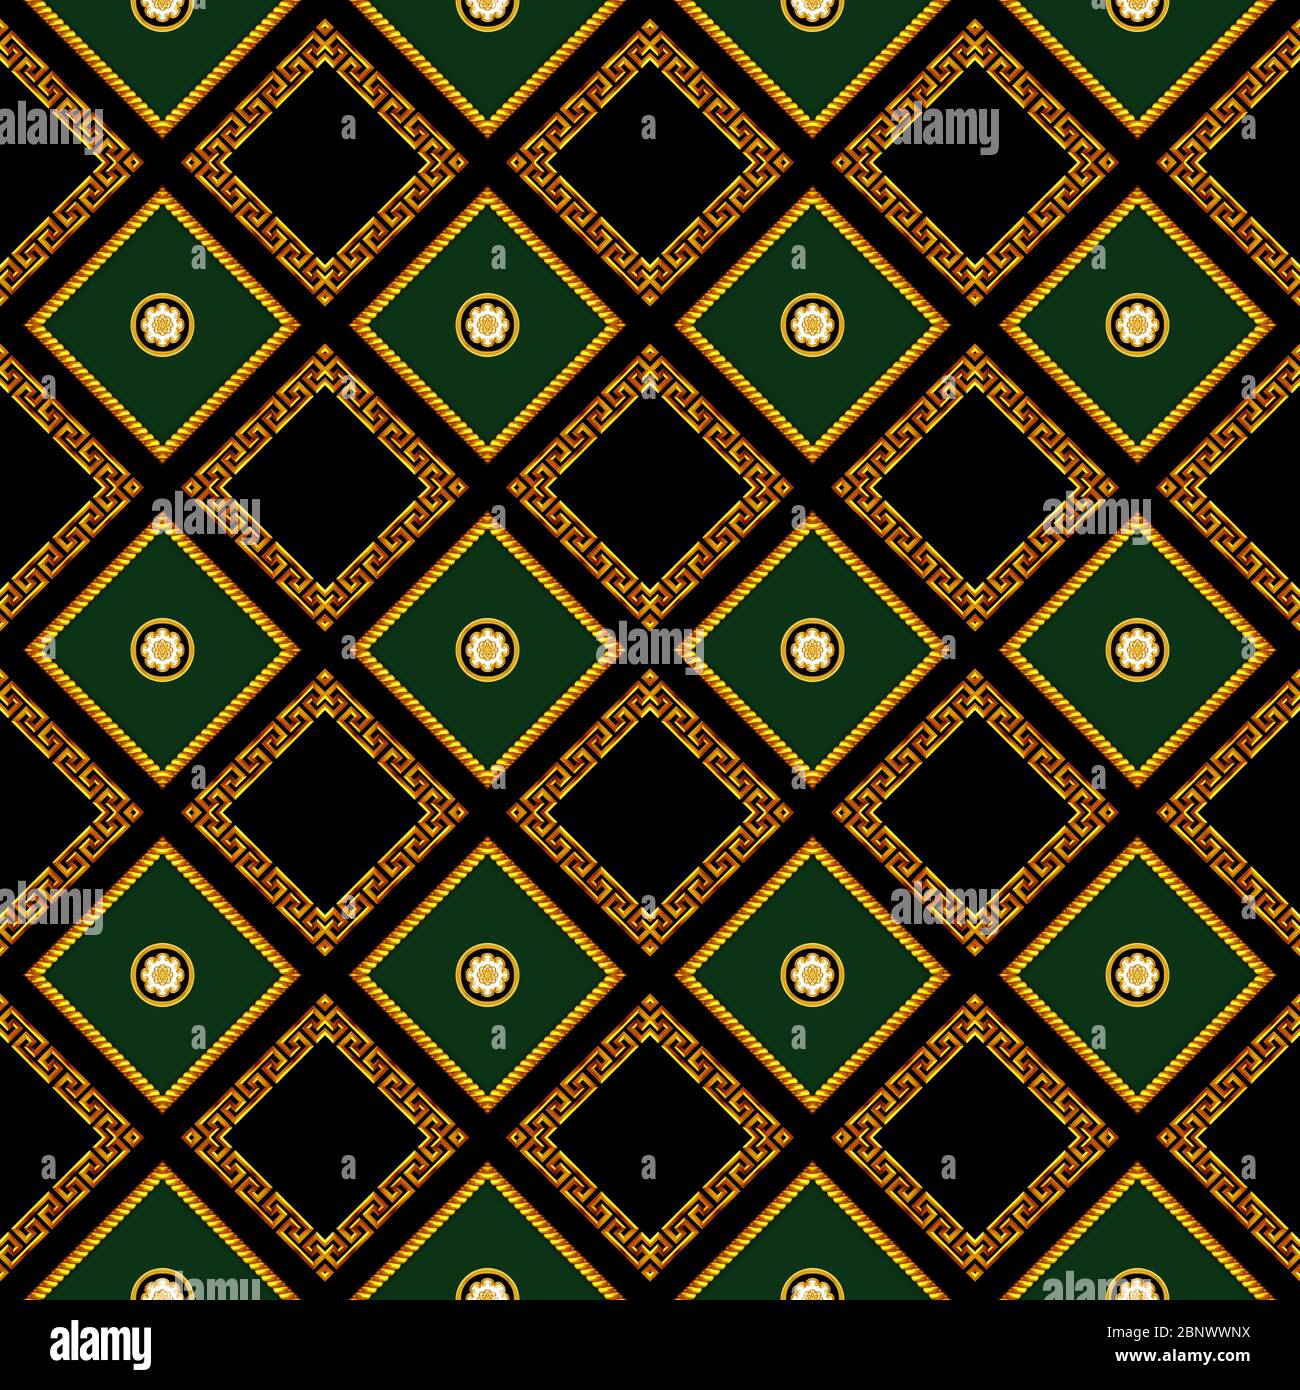 Seamless Luxury Fashional Pattern with Golden Chains Repeating Texture of Antique Decorative Motif. Ready for Textile Prints. Stock Photo